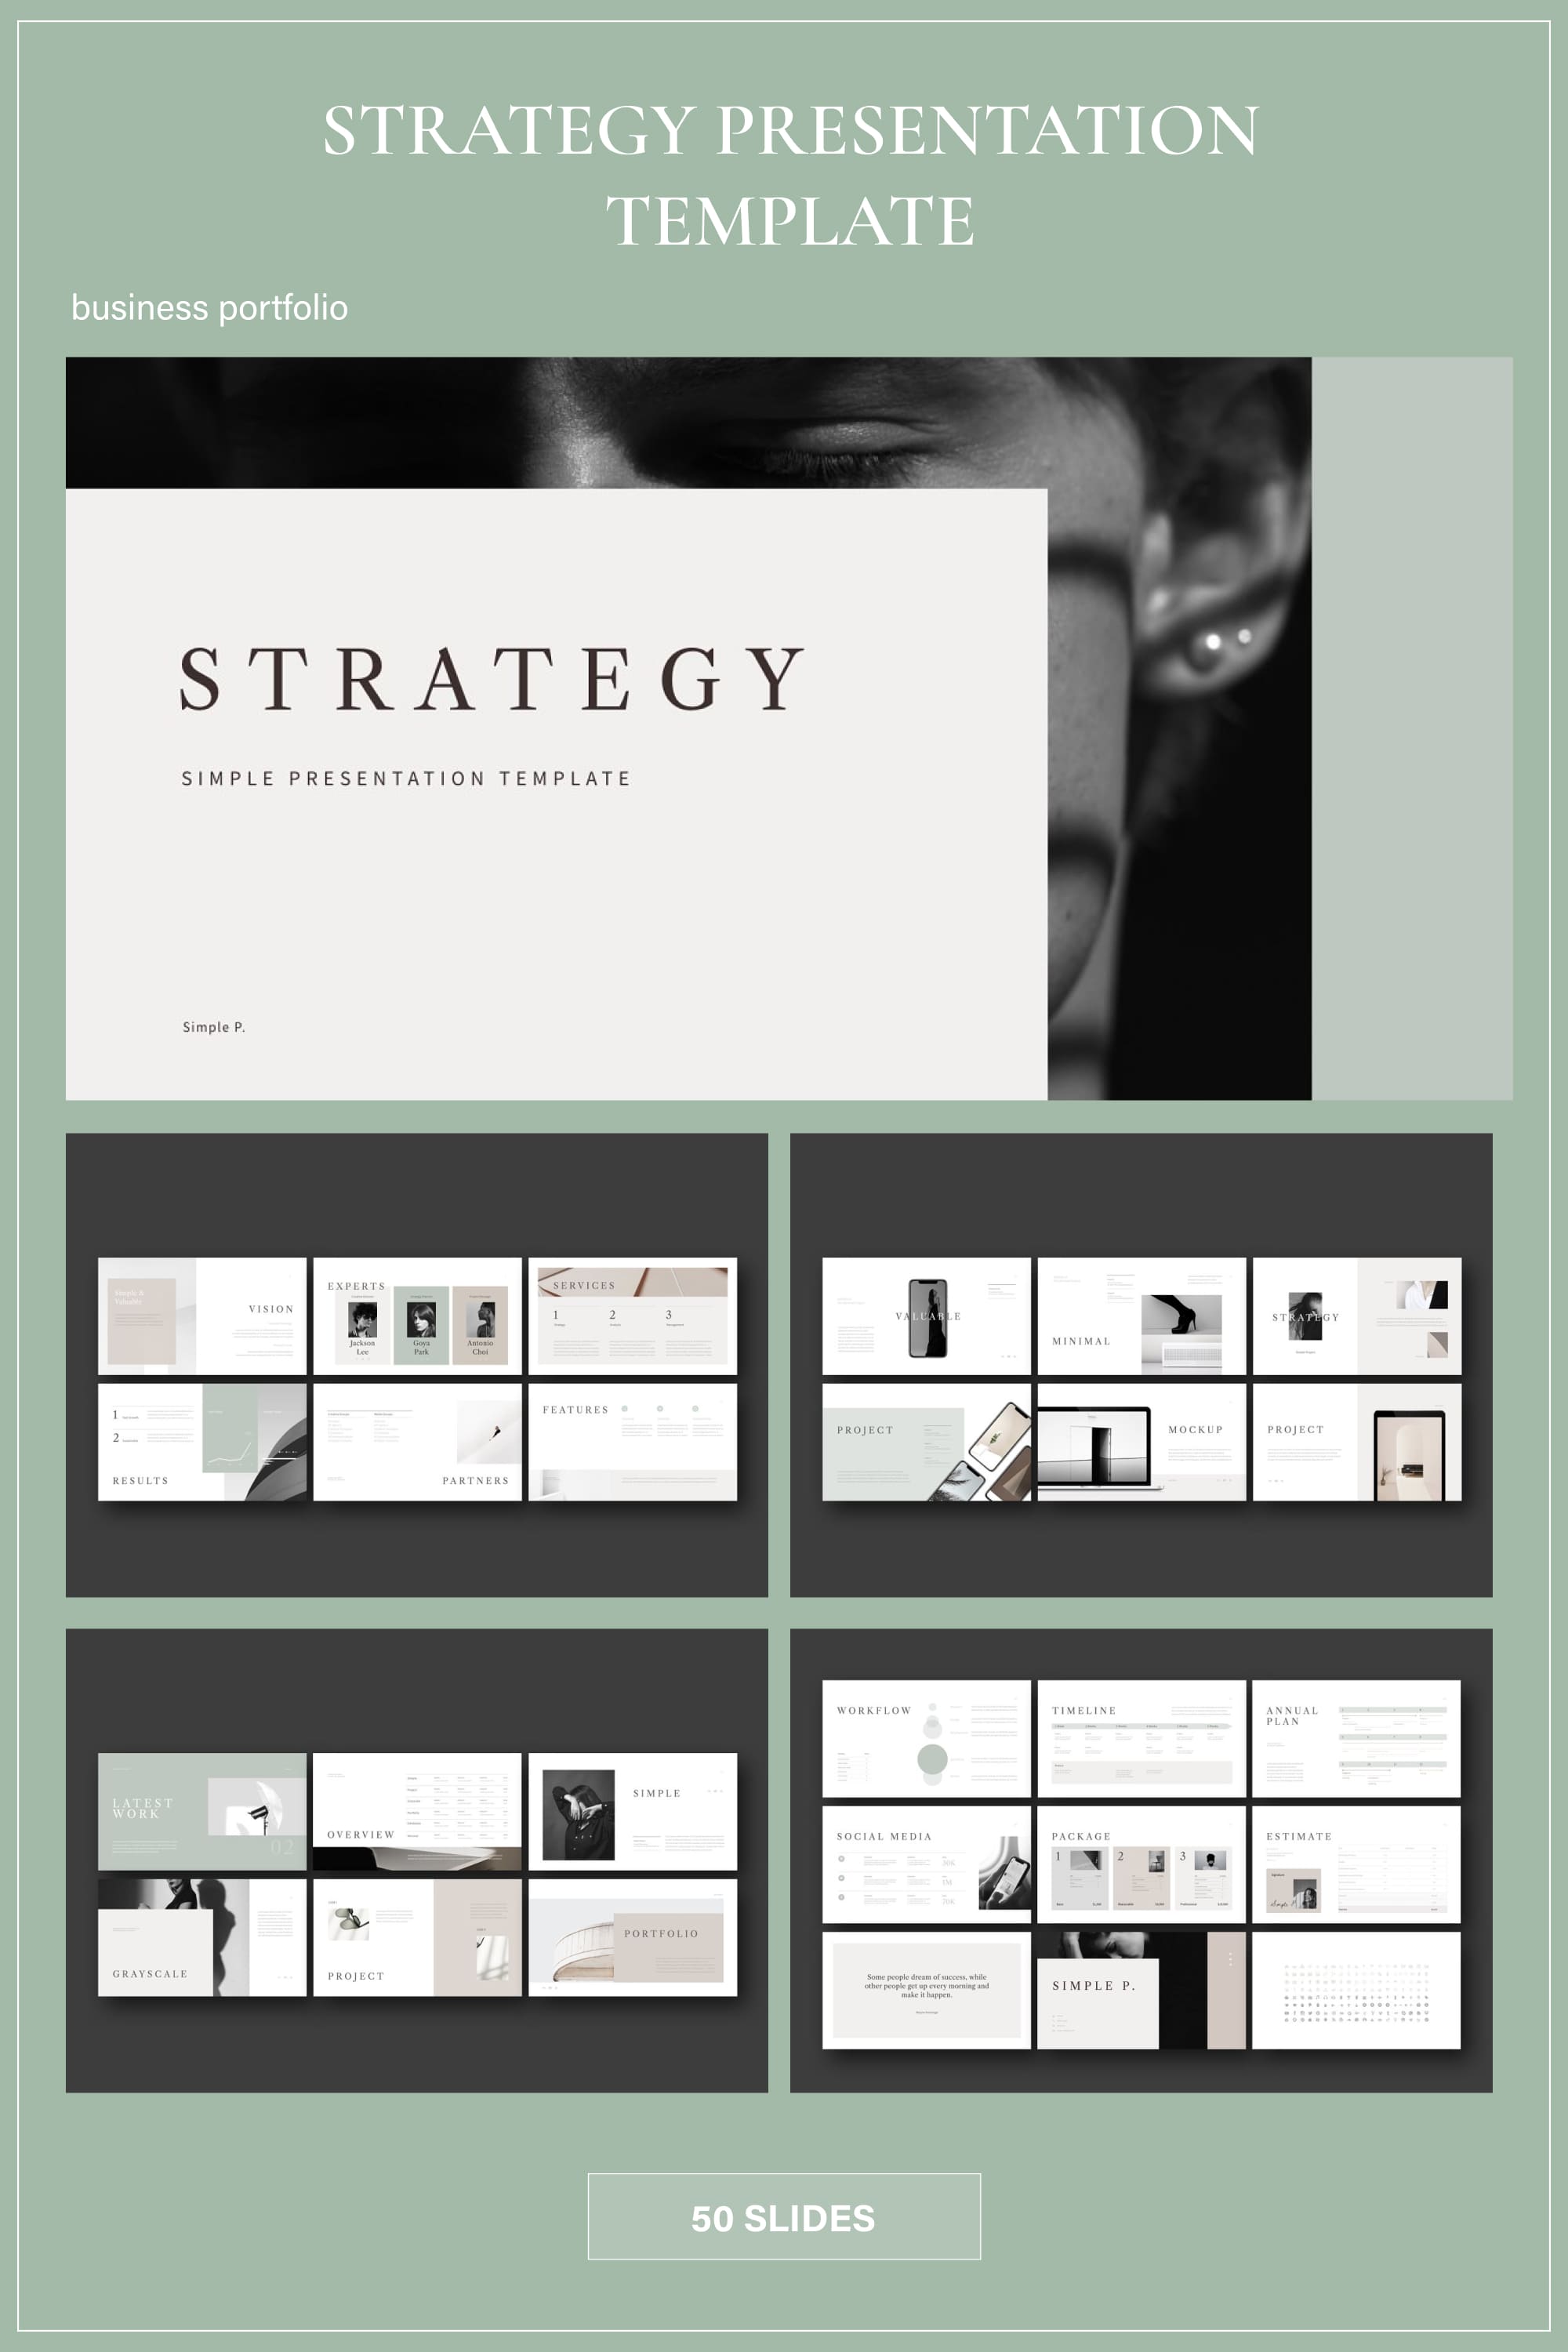 Strategy Presentation Template - preview of Pinterest image.